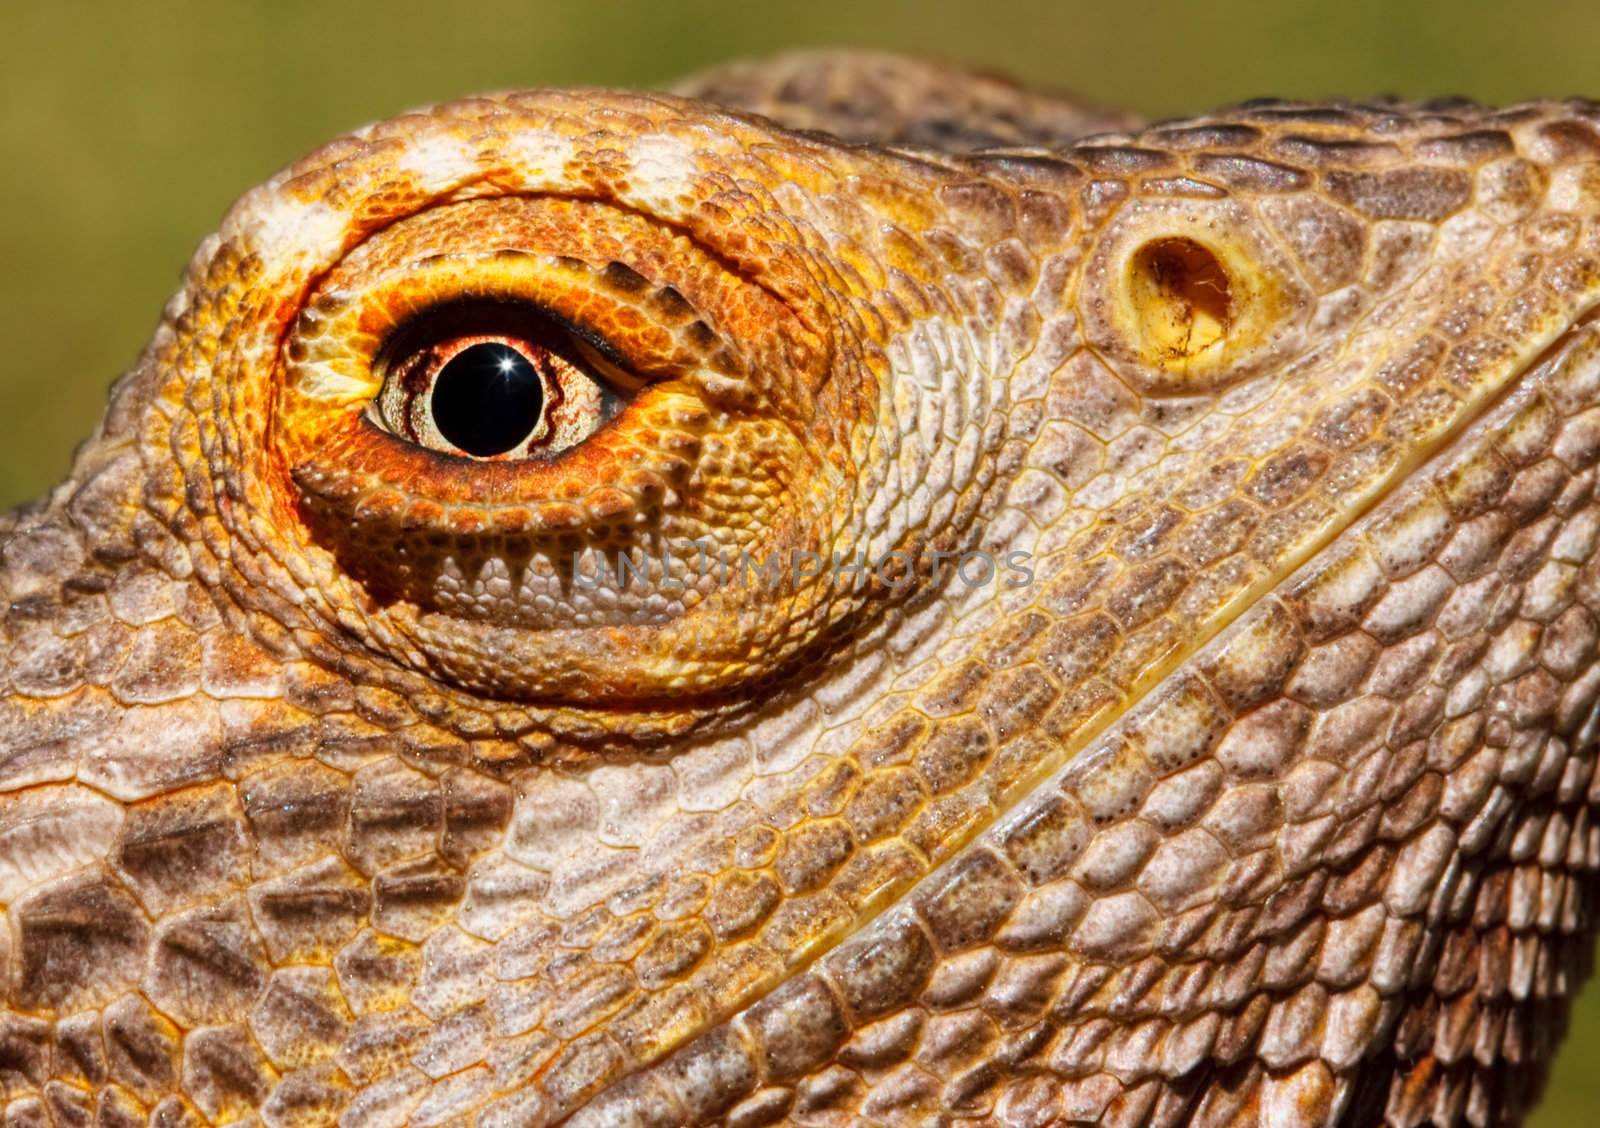 Closeup of a bearded dragon with very sharp focus on the eye